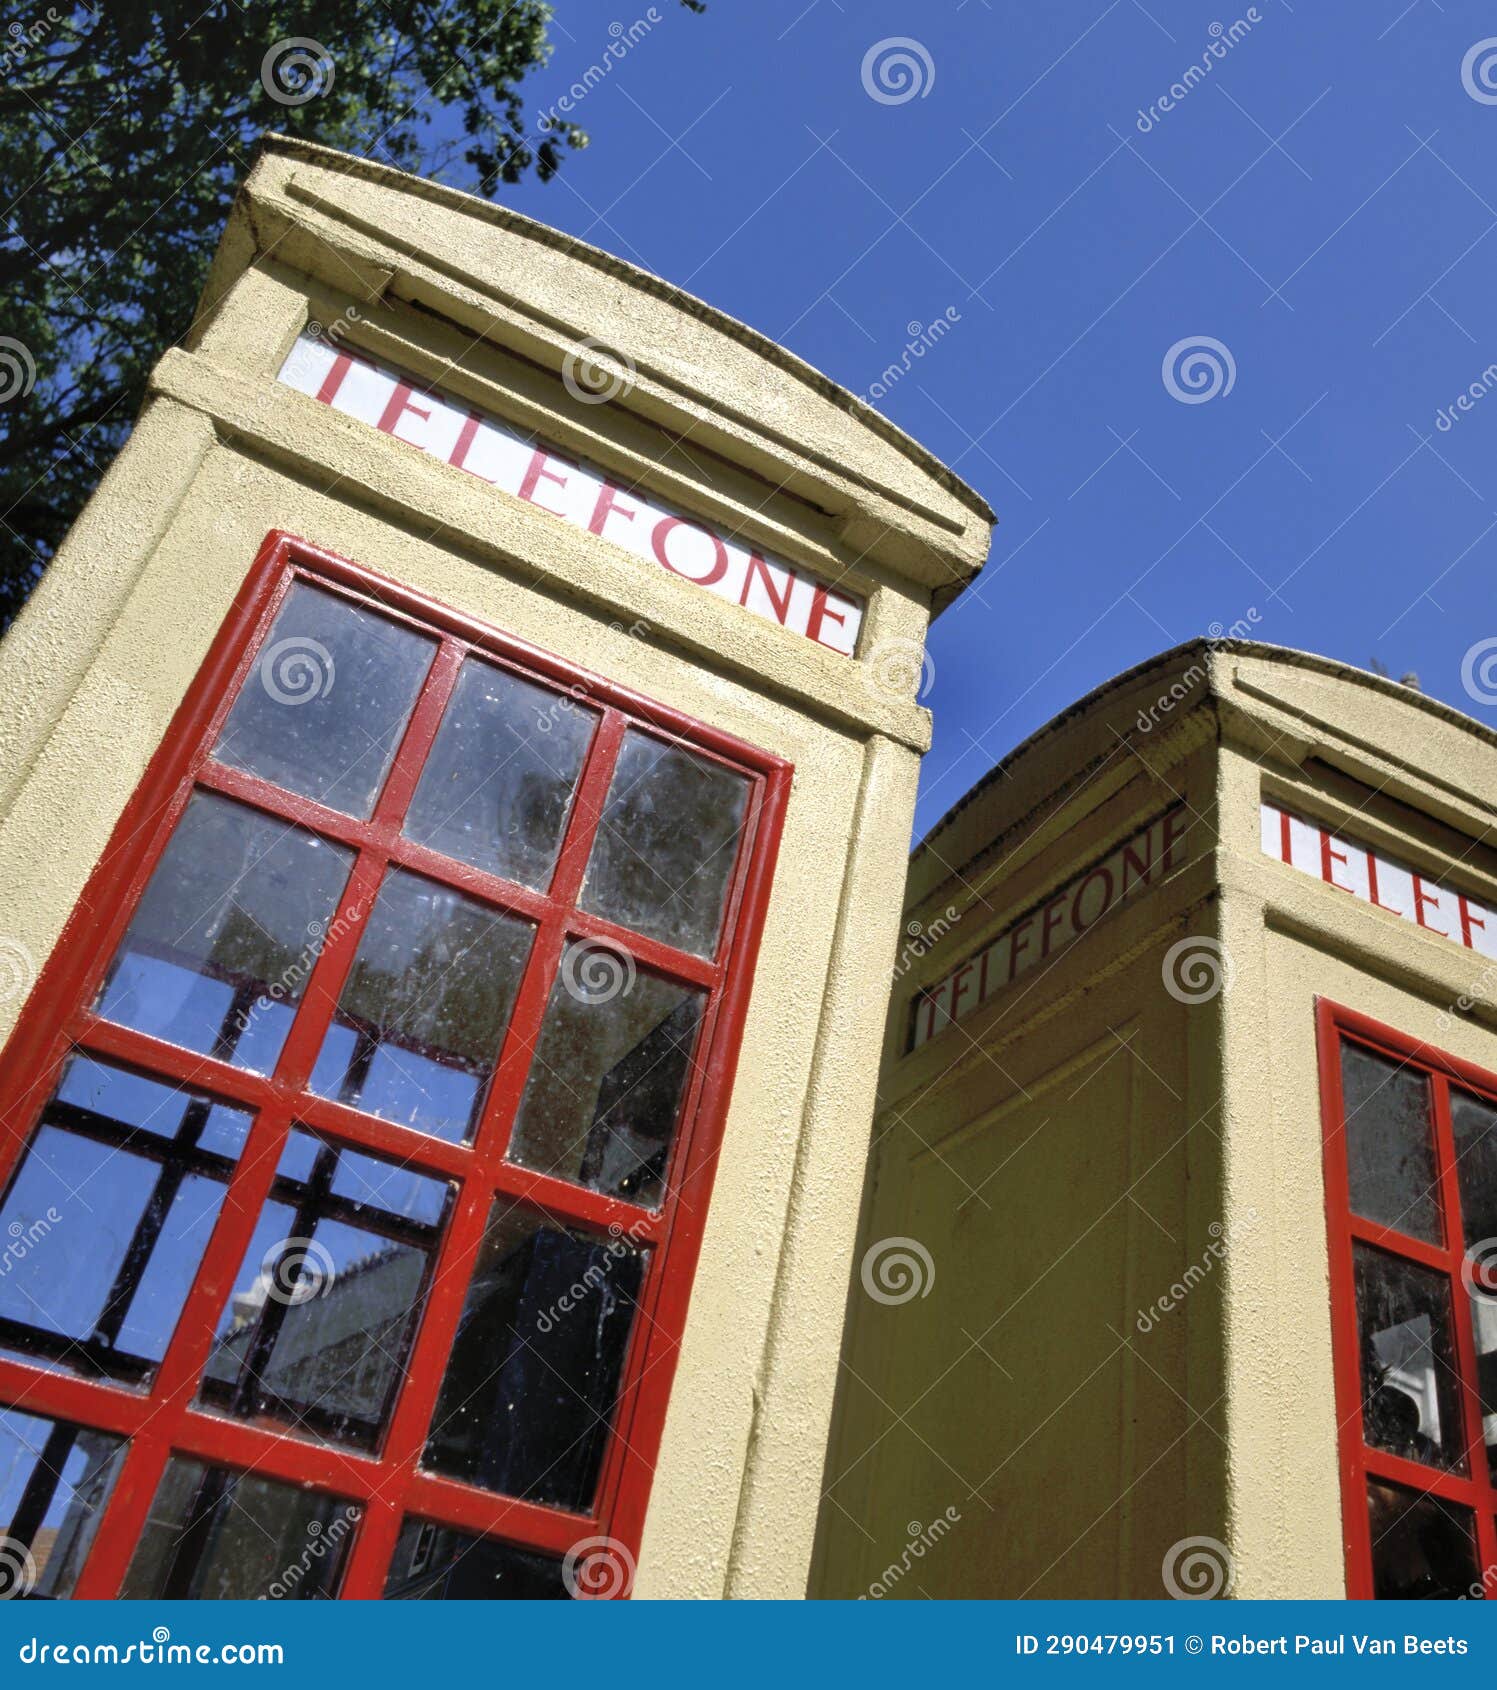 two oldfashioned telephone booths